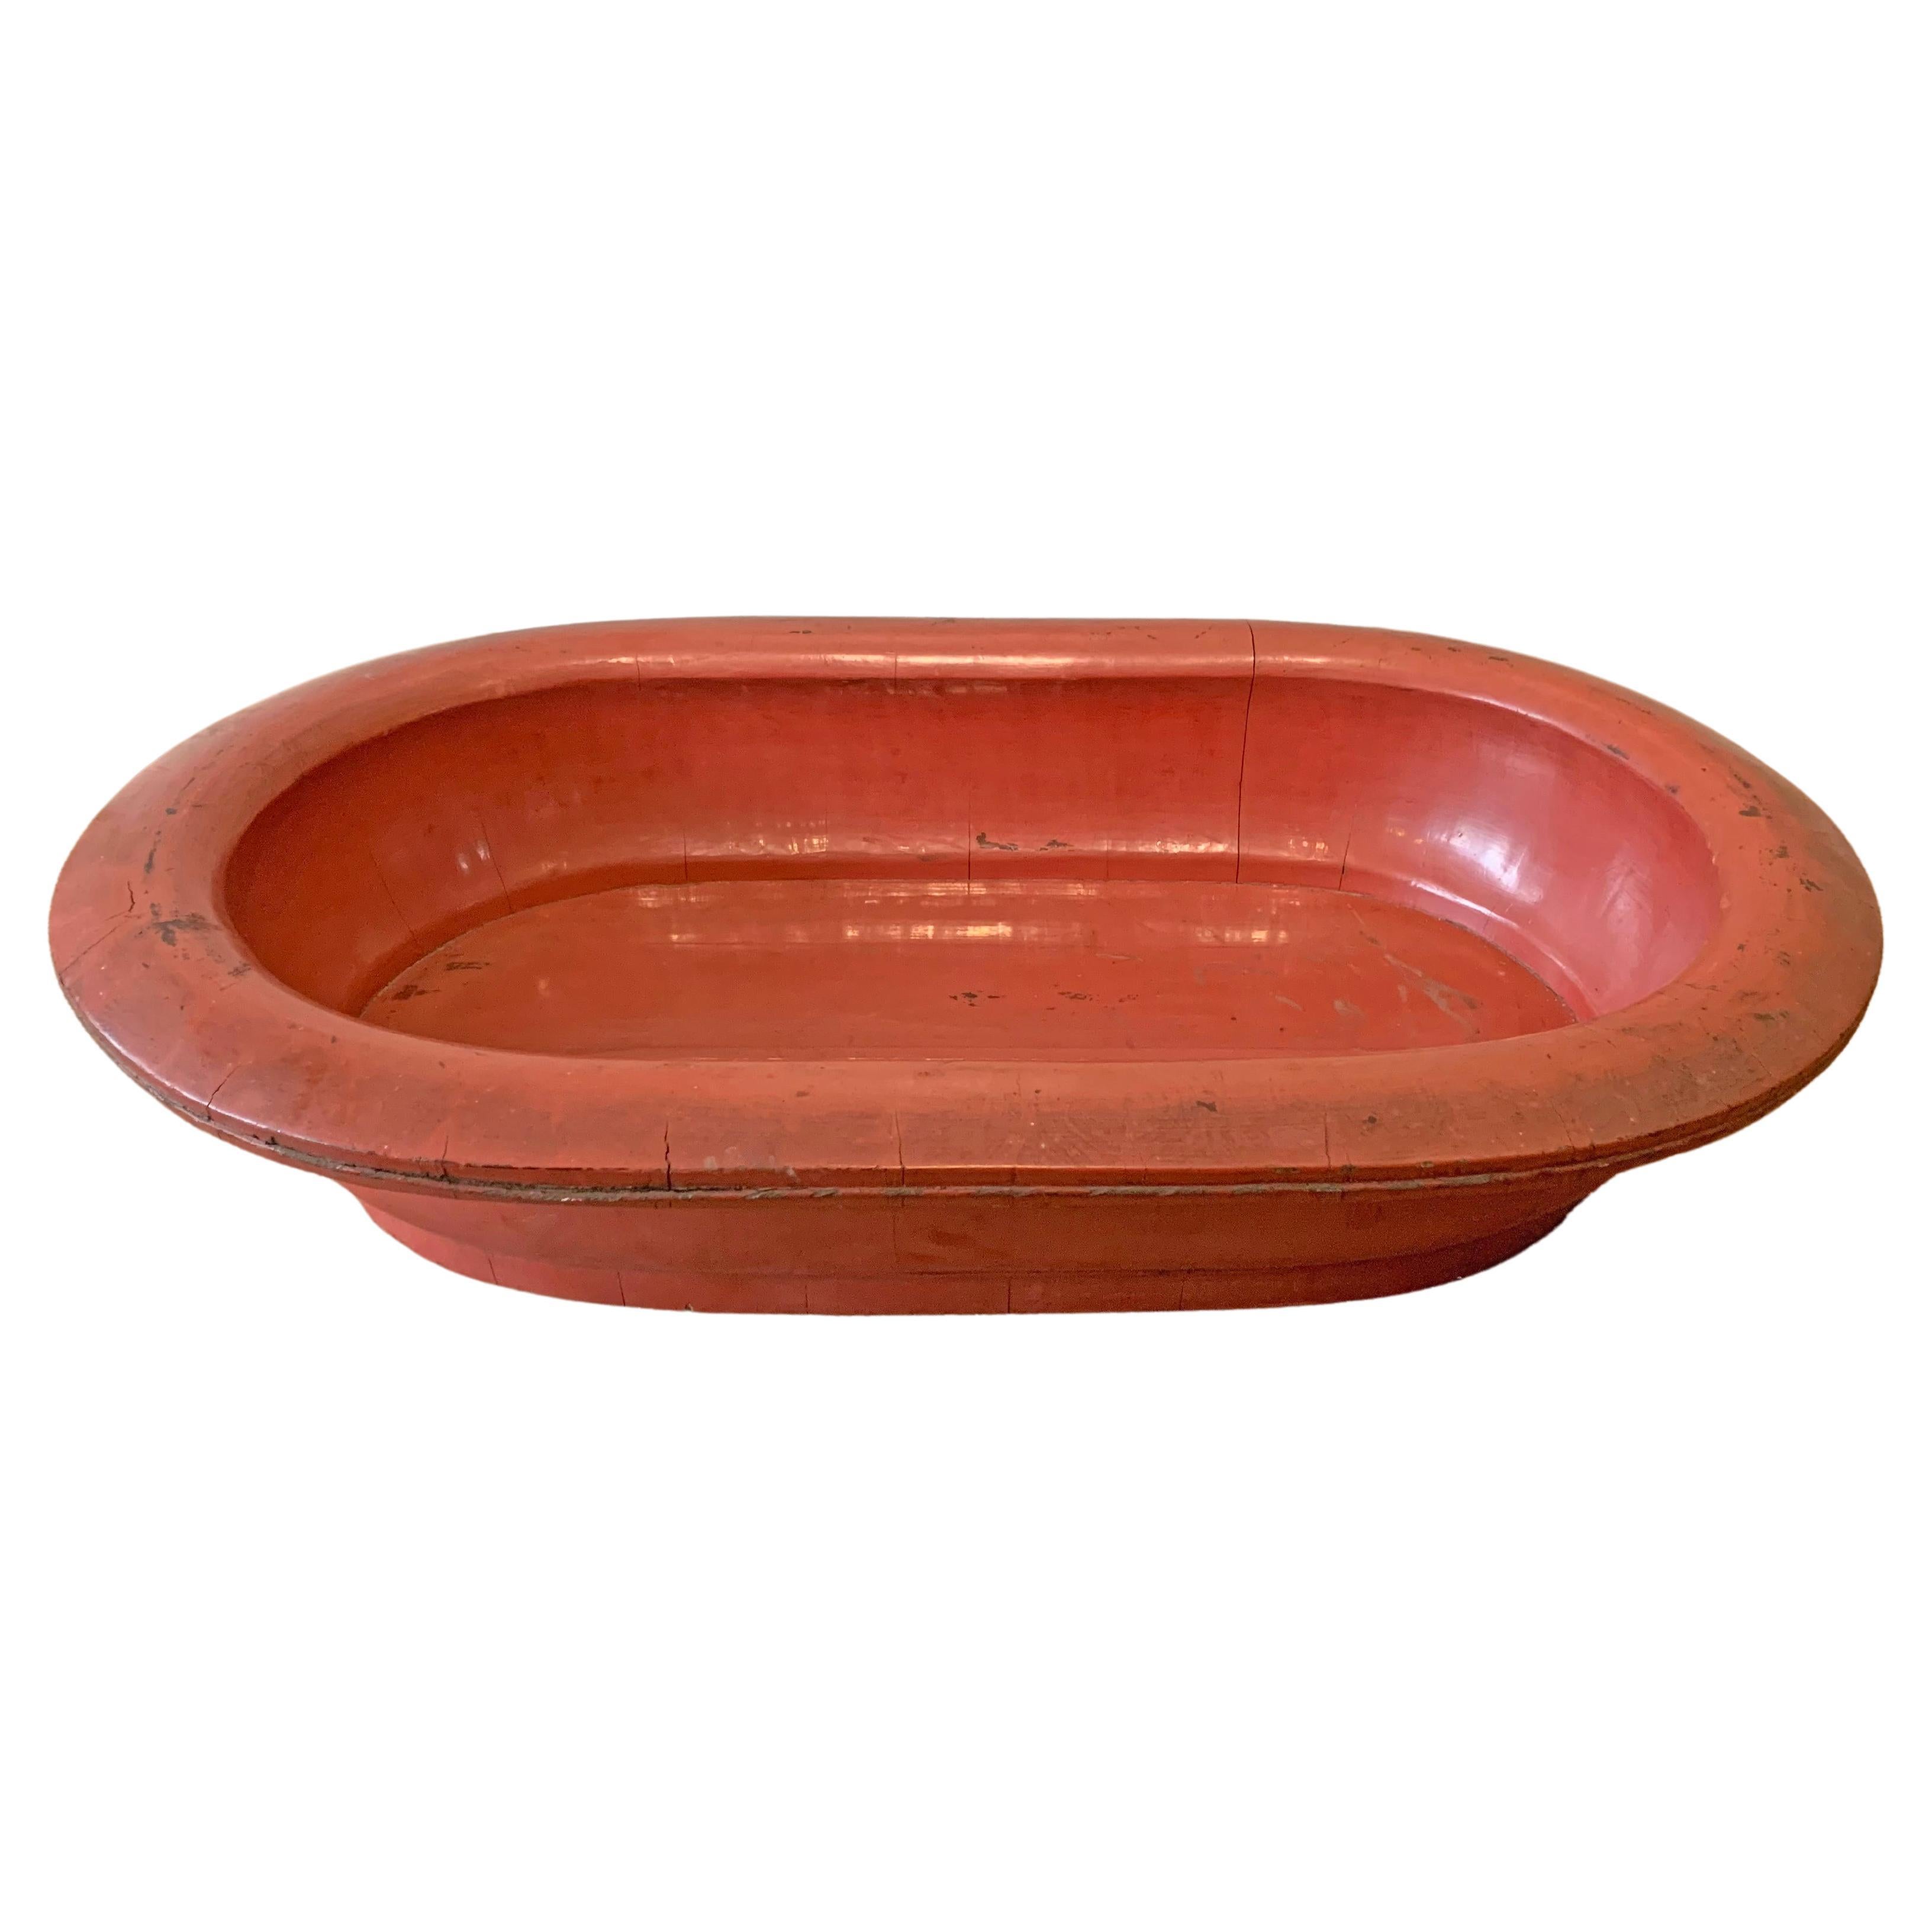 Very Large Chinese Red Lacquer Decorative Wood Bowl, Early 20th Century